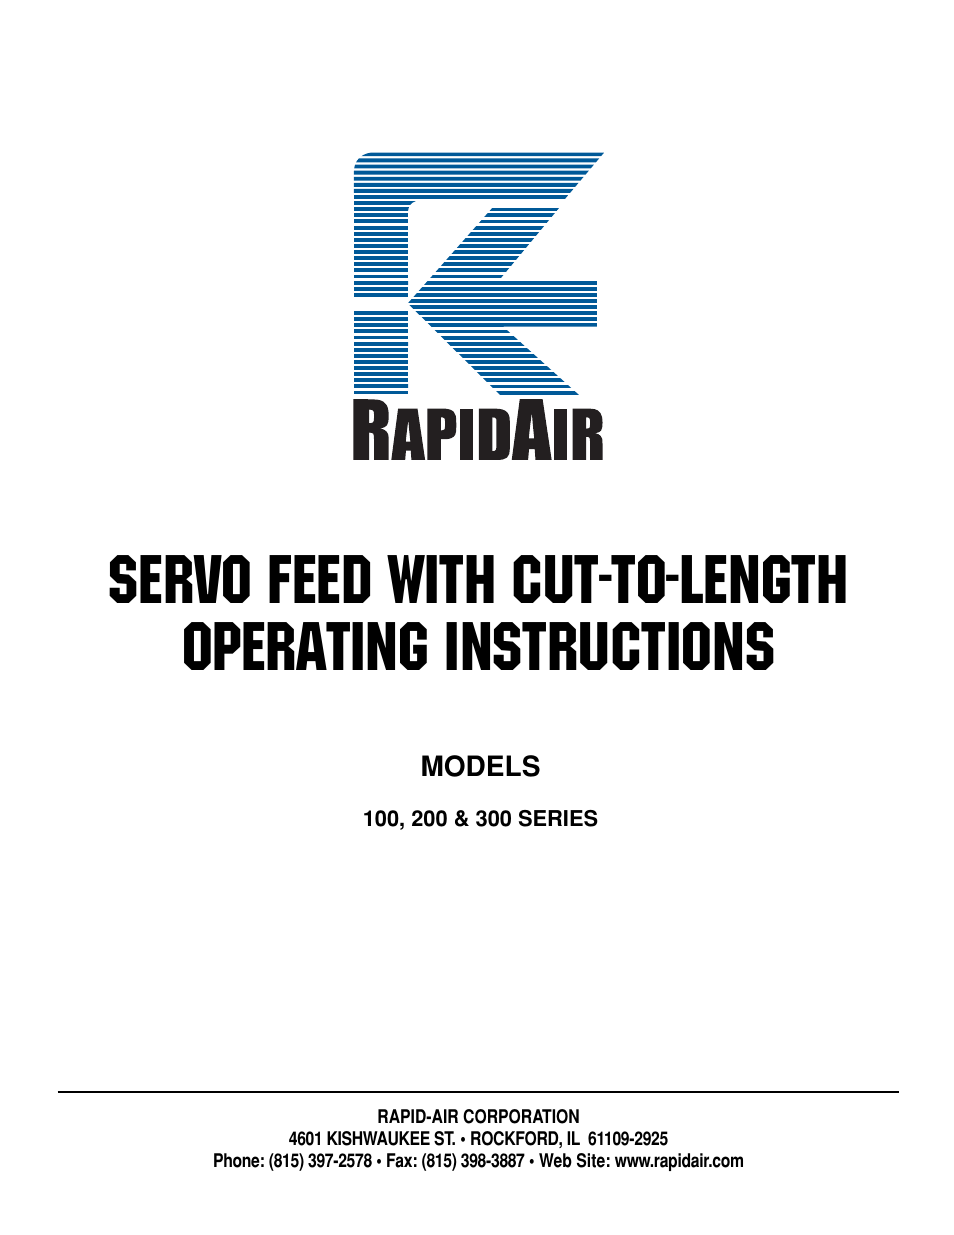 SERVO FEED WITH CUT-TO-LENGTH: 100, 200 & 300 SERIES